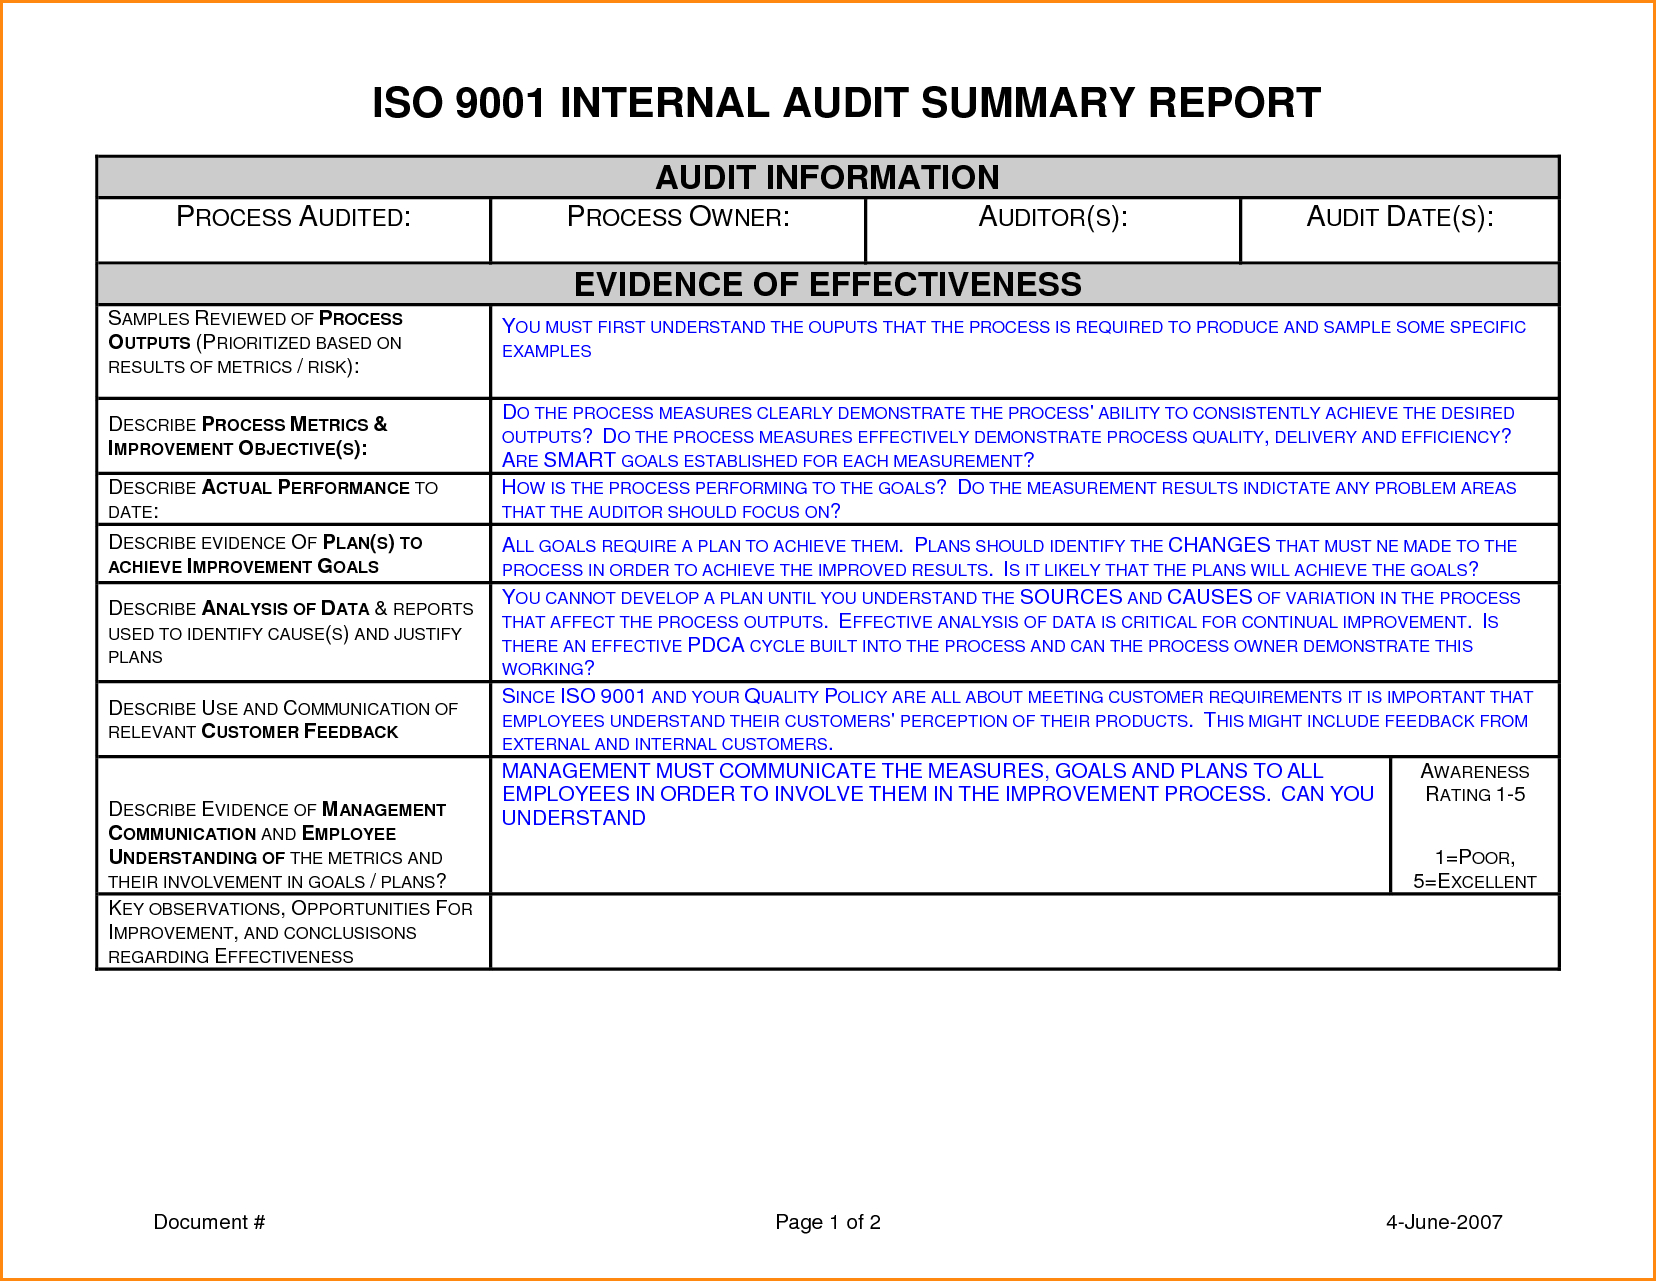 Internal Audit Report Template Iso 9001 12 Important Facts Within Internal Audit Report Template Iso 9001